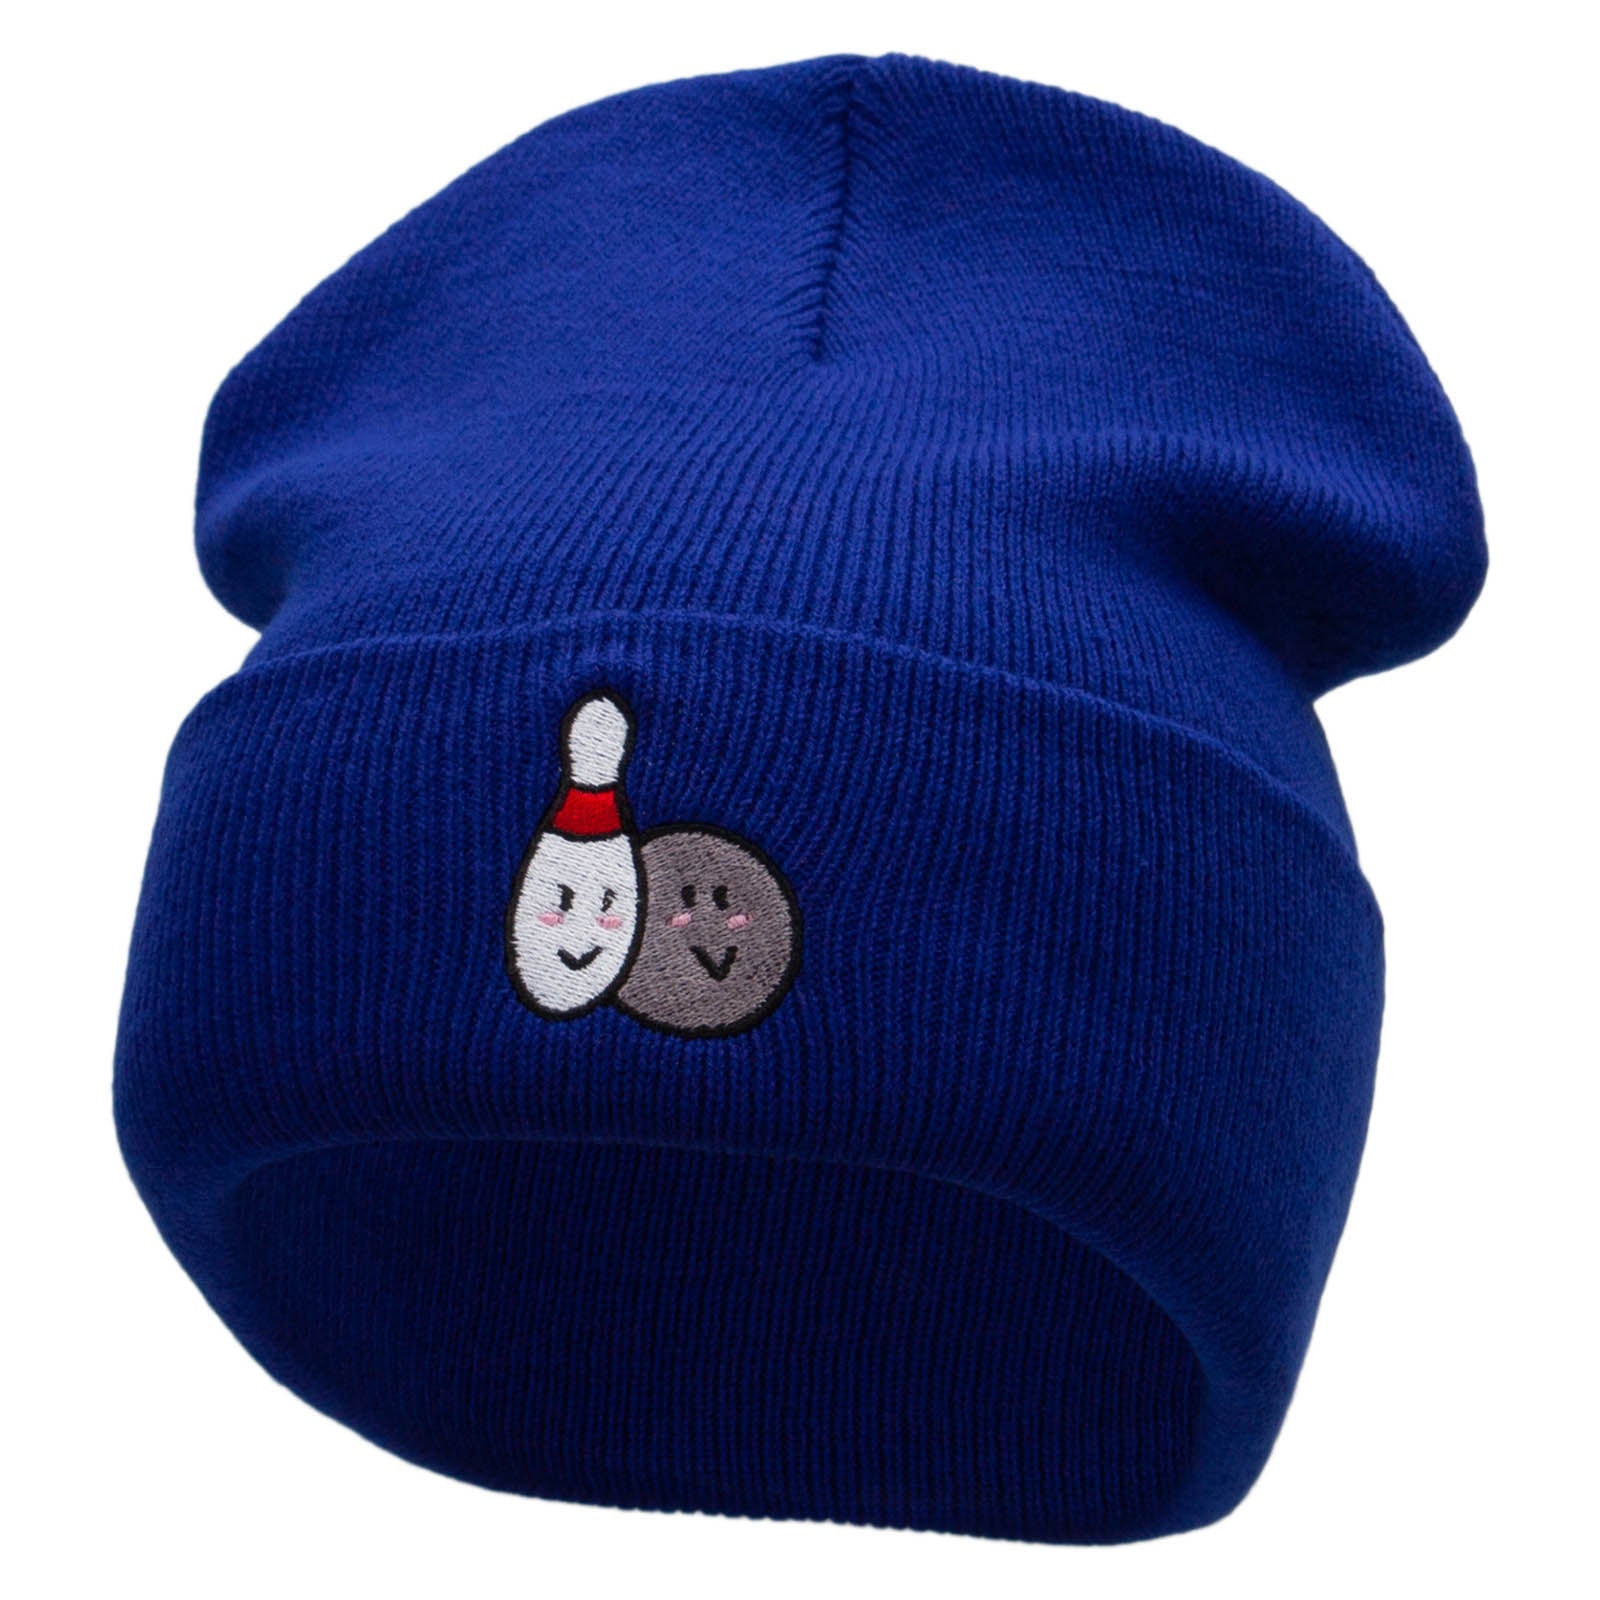 Bowling Smilies Embroidered 12 Inch Long Knitted Beanie - Royal OSFM